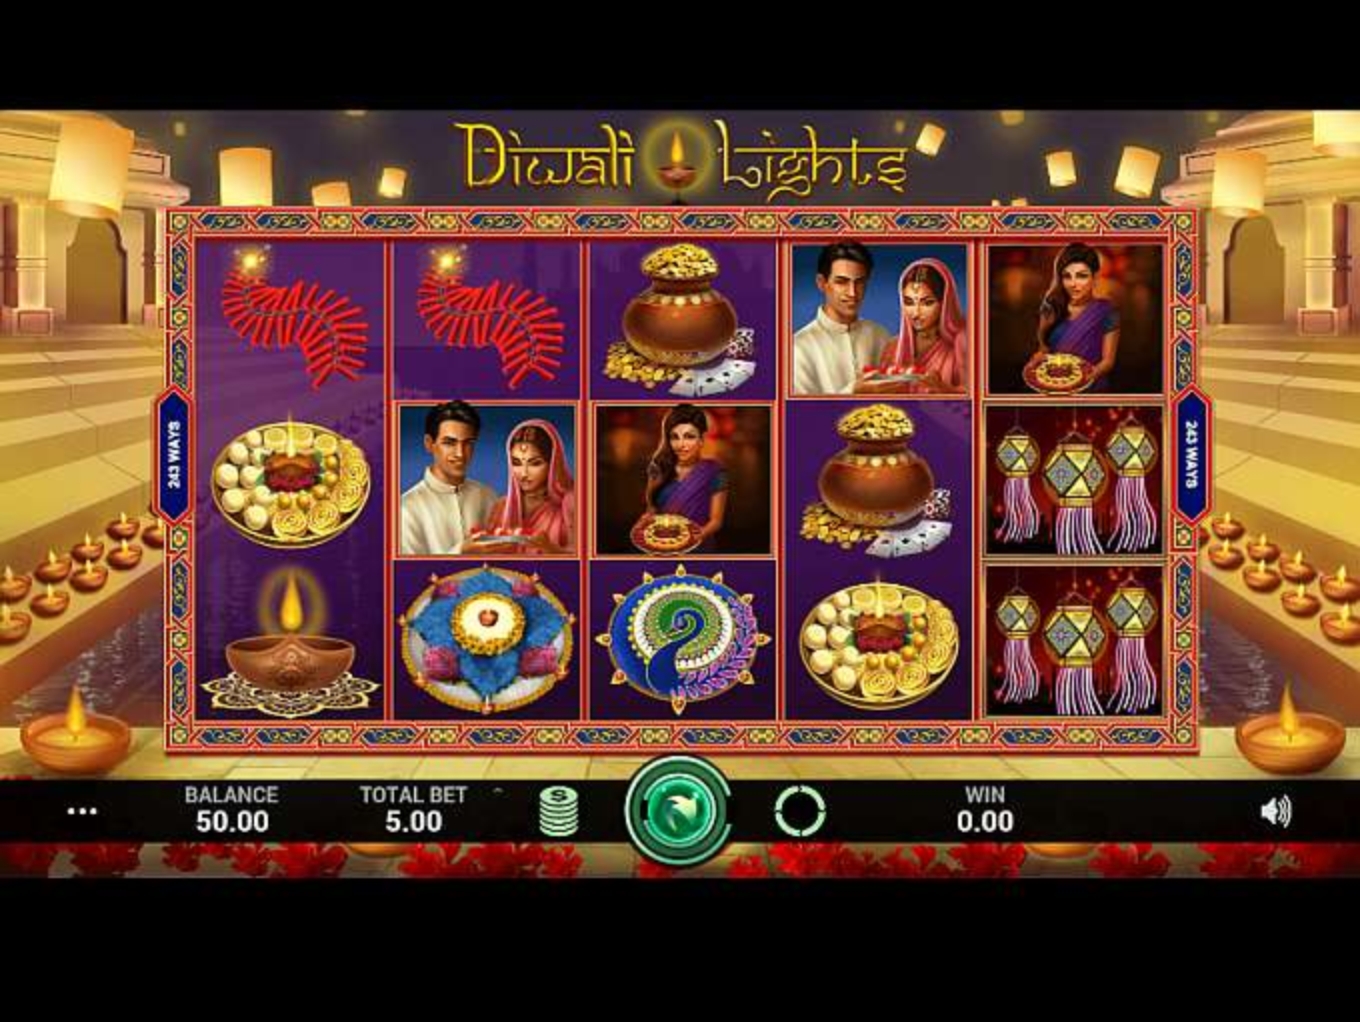 The Diwali Lights Online Slot Demo Game by Indi Slots